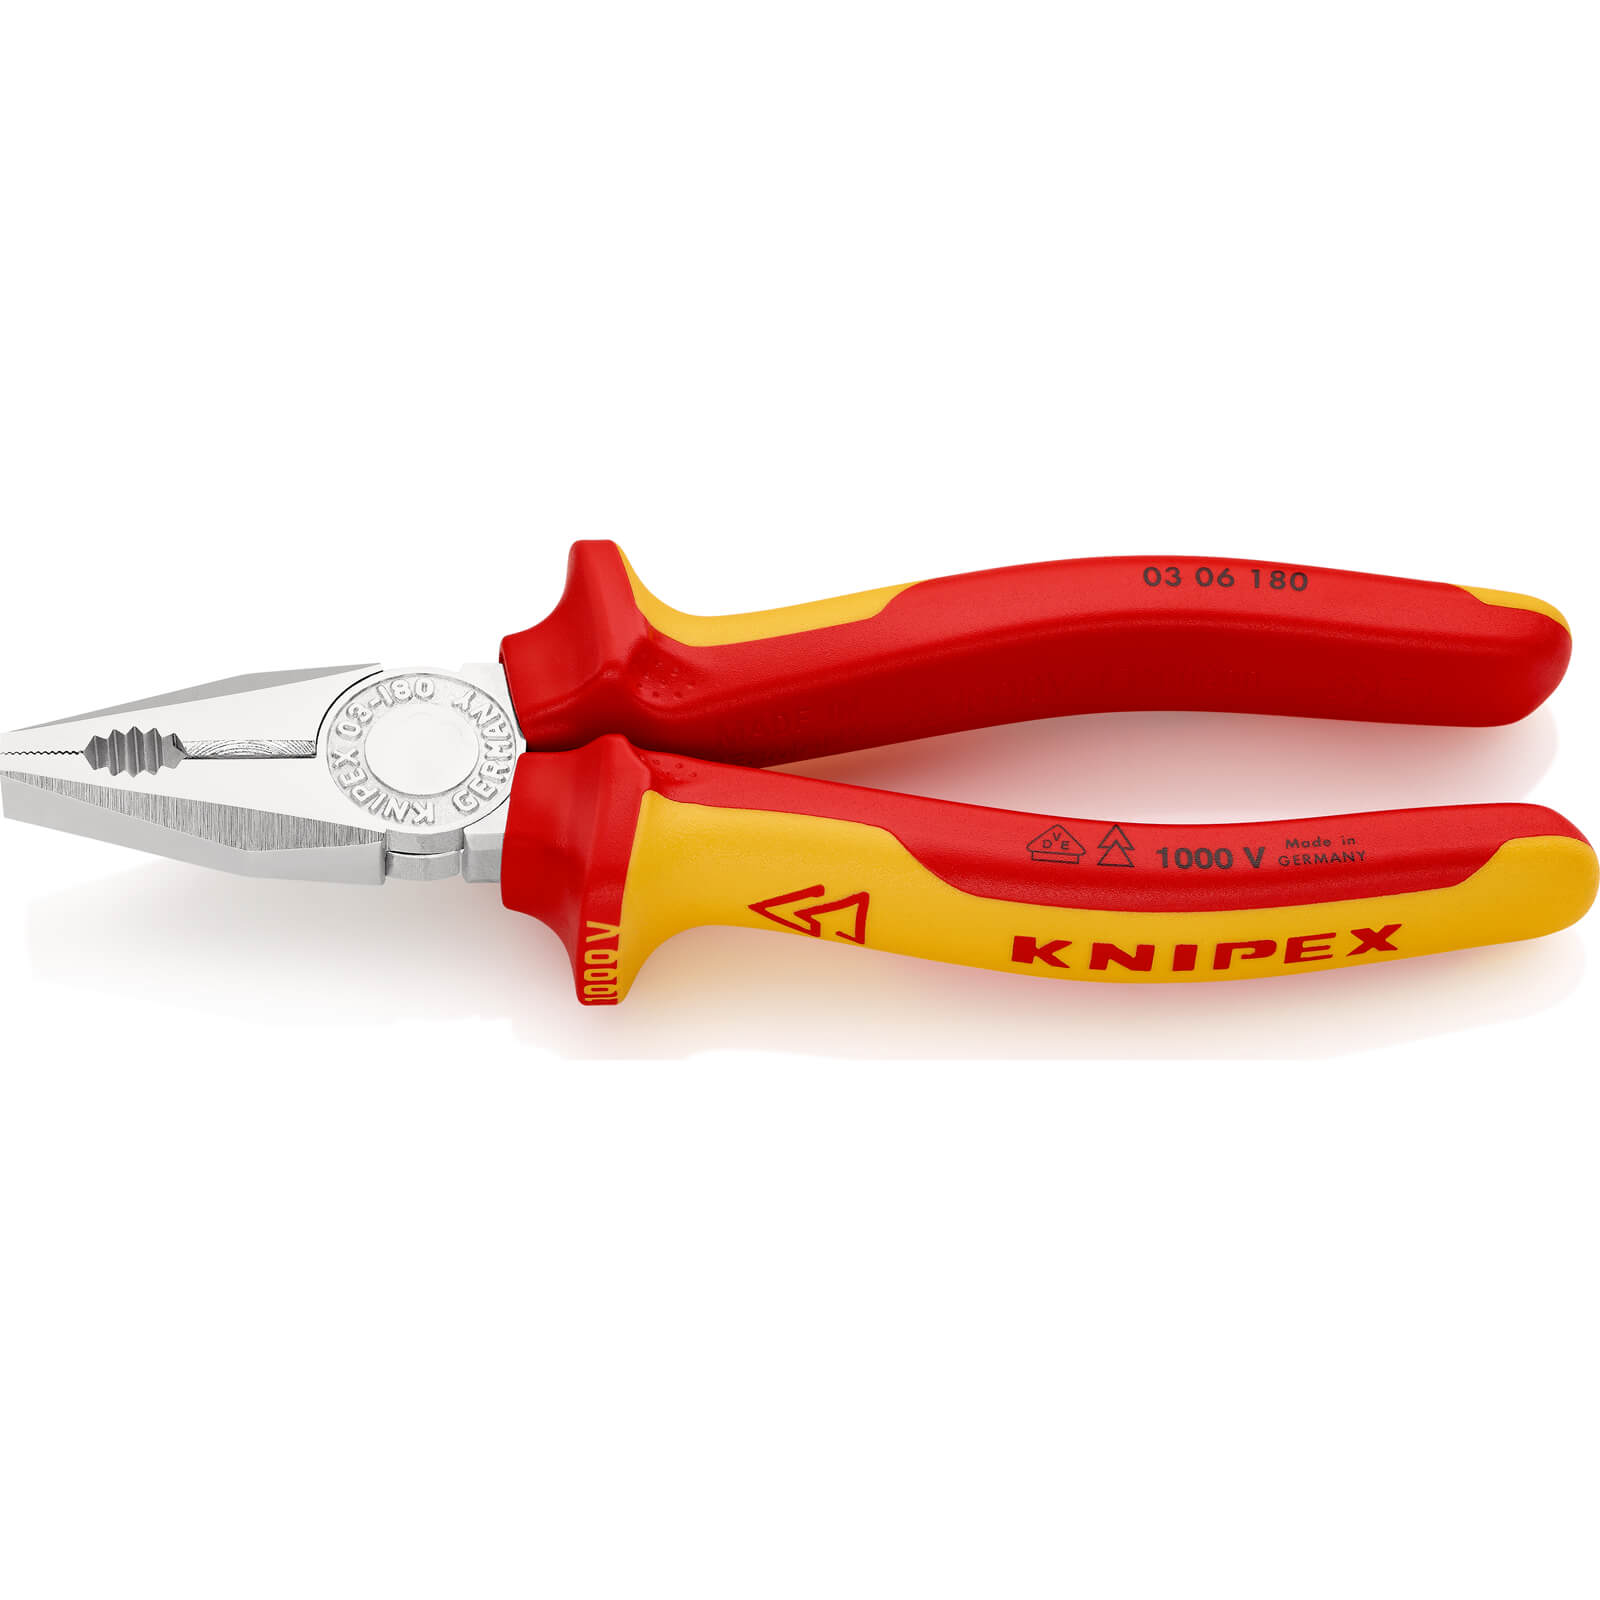 Photo of Knipex 03 06 Vde Insulated Combination Pliers 180mm